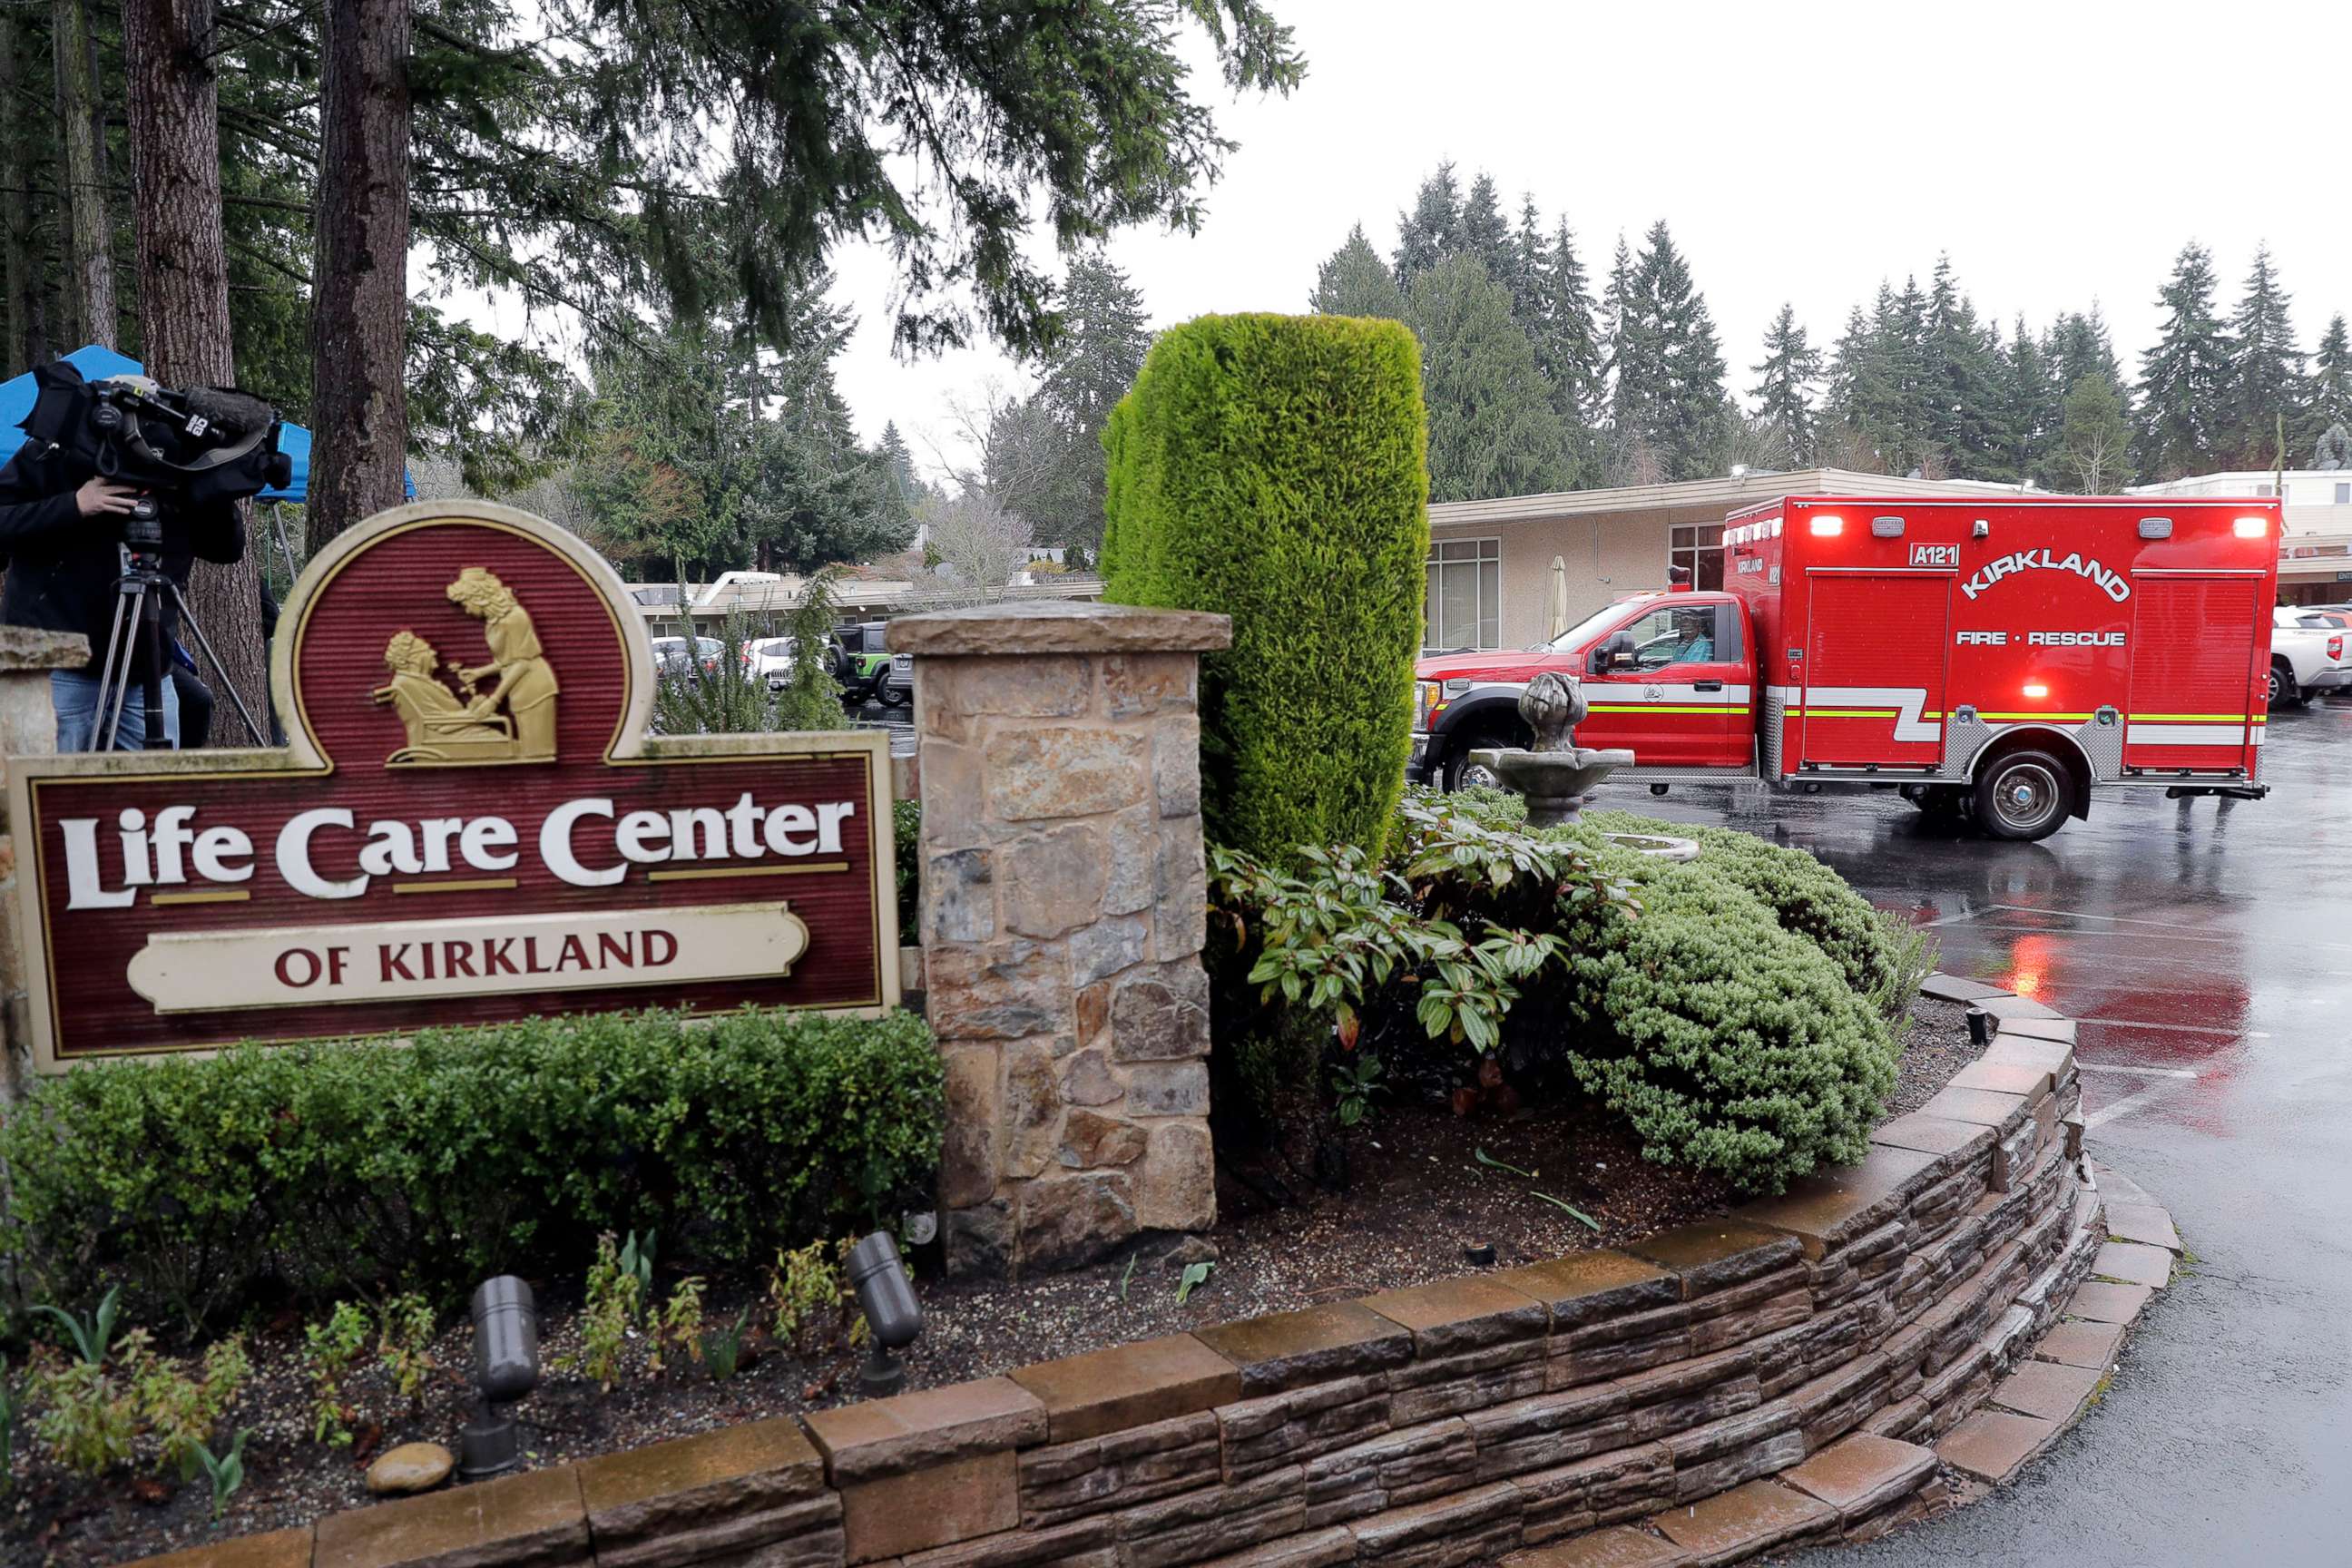 PHOTO: An ambulance is shown, March 6, 2020, at the Life Care Center in Kirkland, Wash., which has become the epicenter of the coronavirus outbreak in Washington state. This ambulance left the facility after a short time and did not transport a patient.